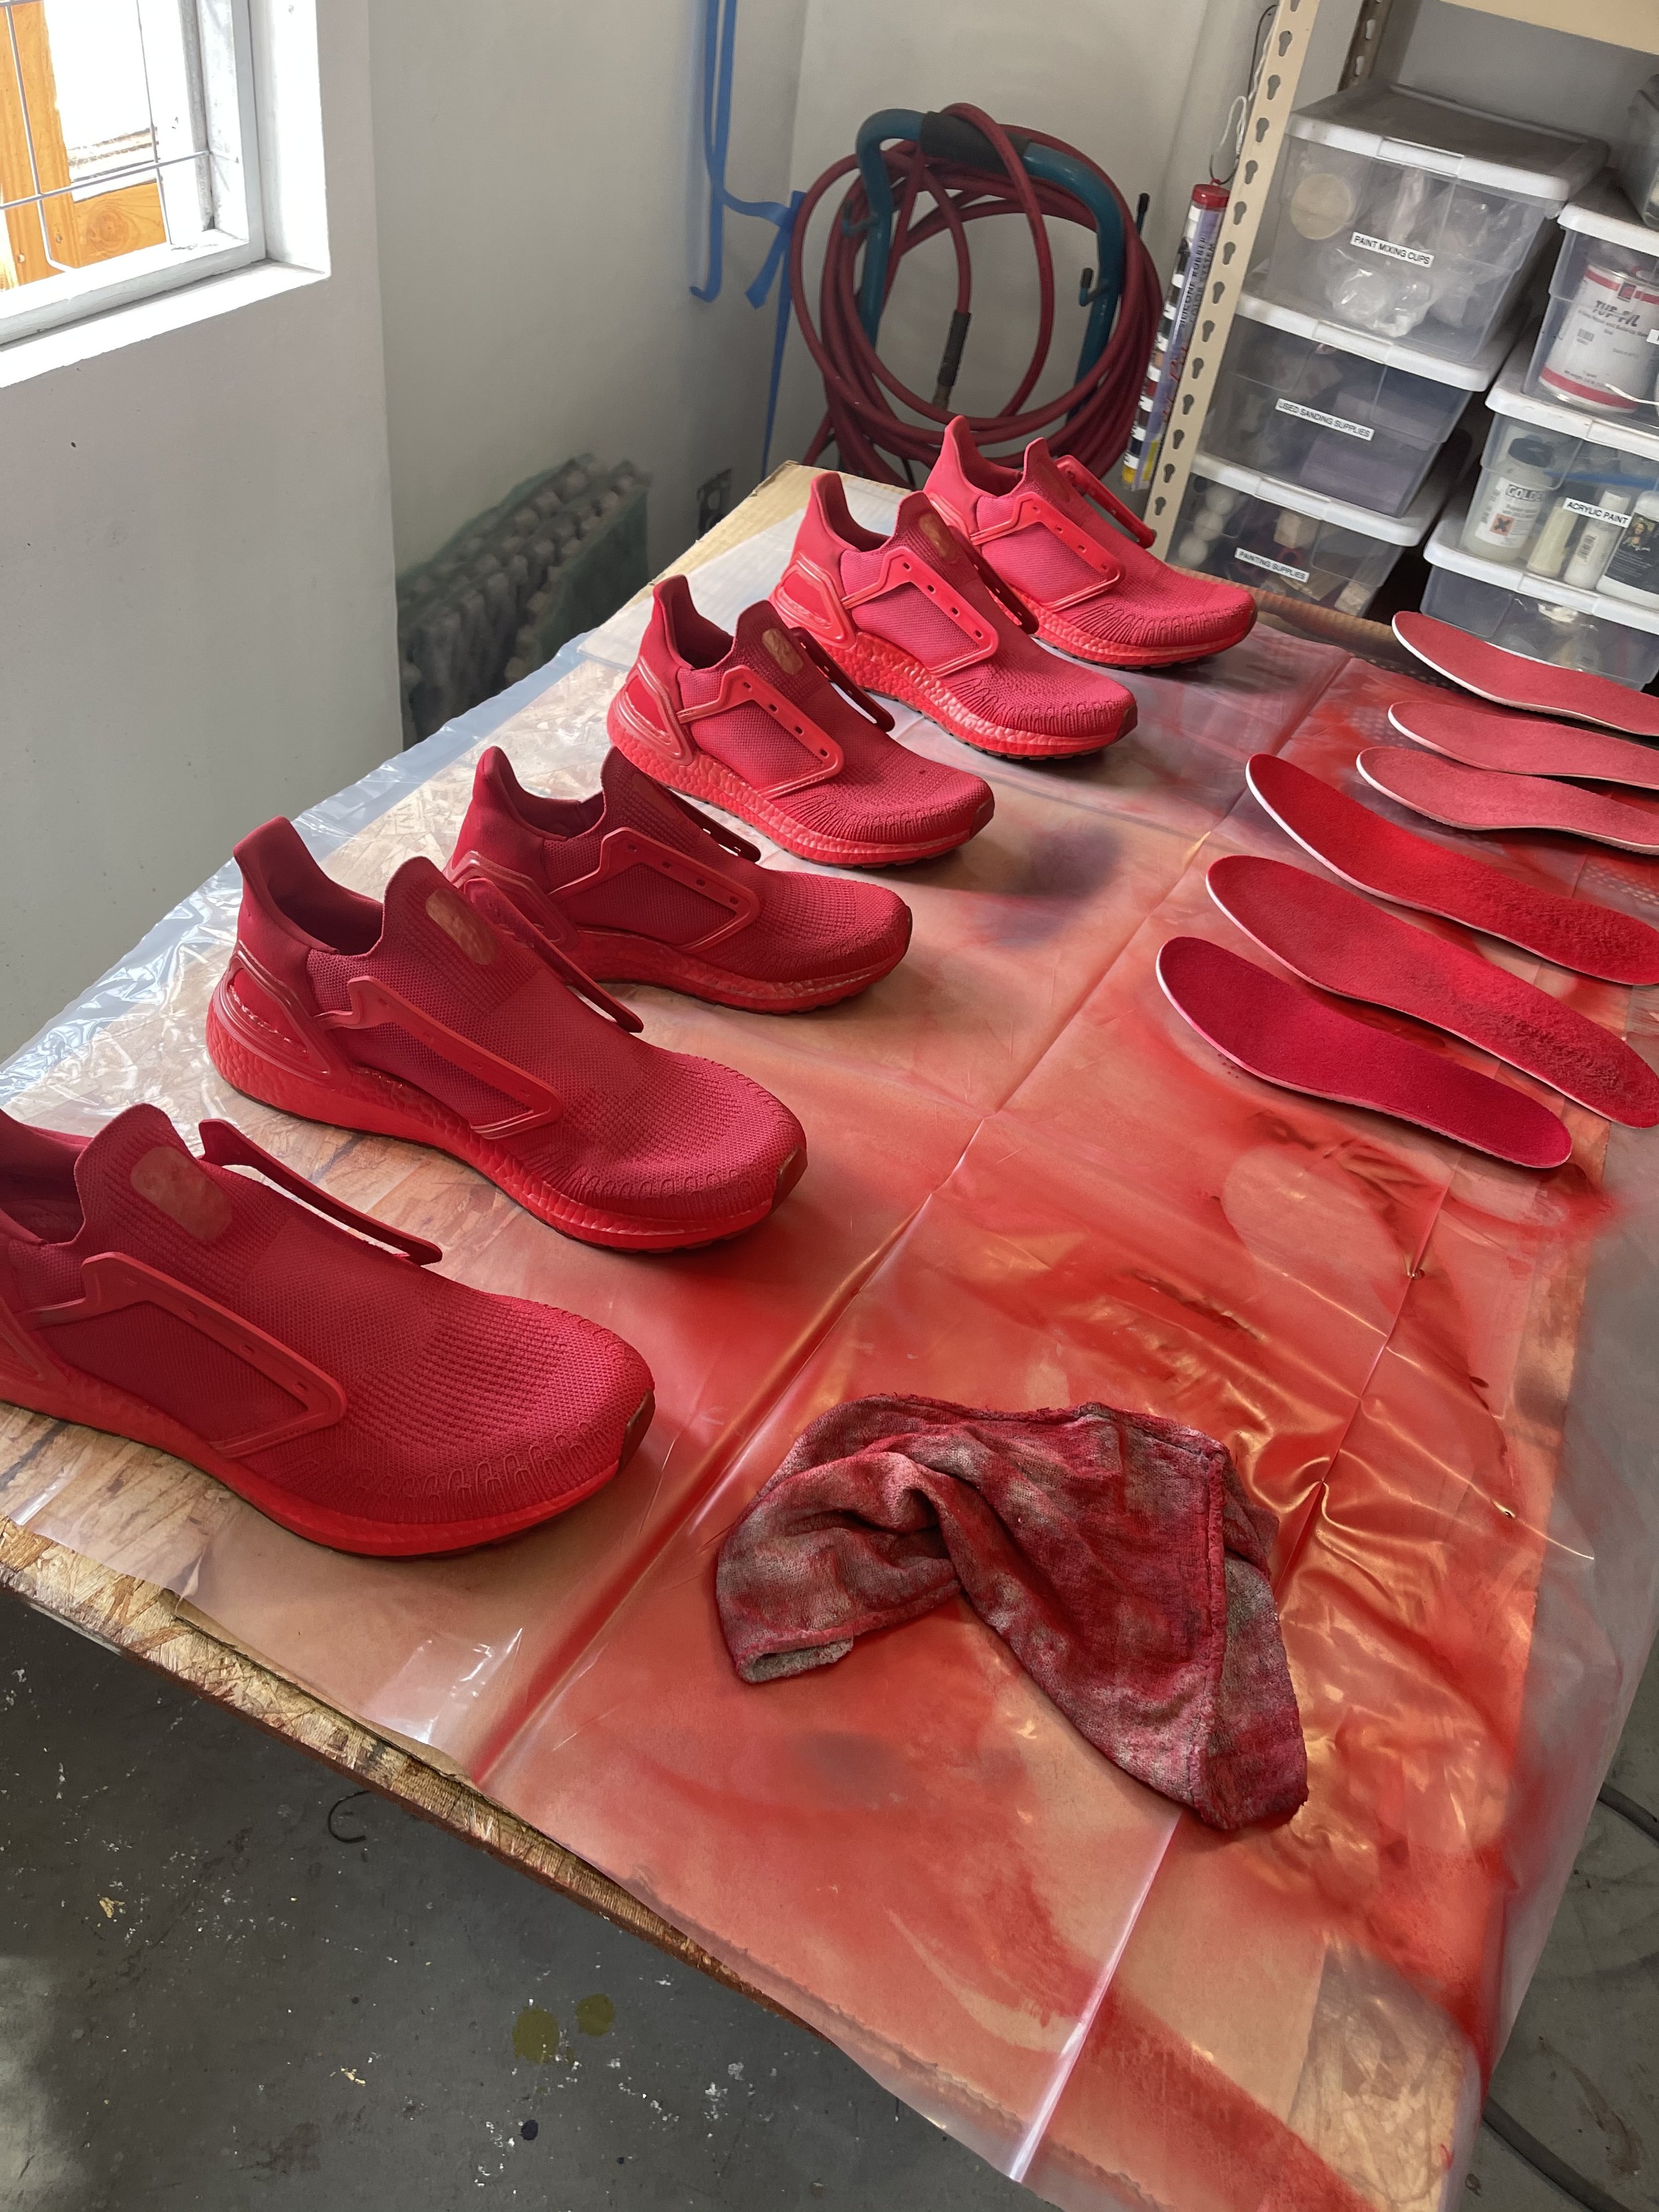 Spray Painting the White Shoes Red